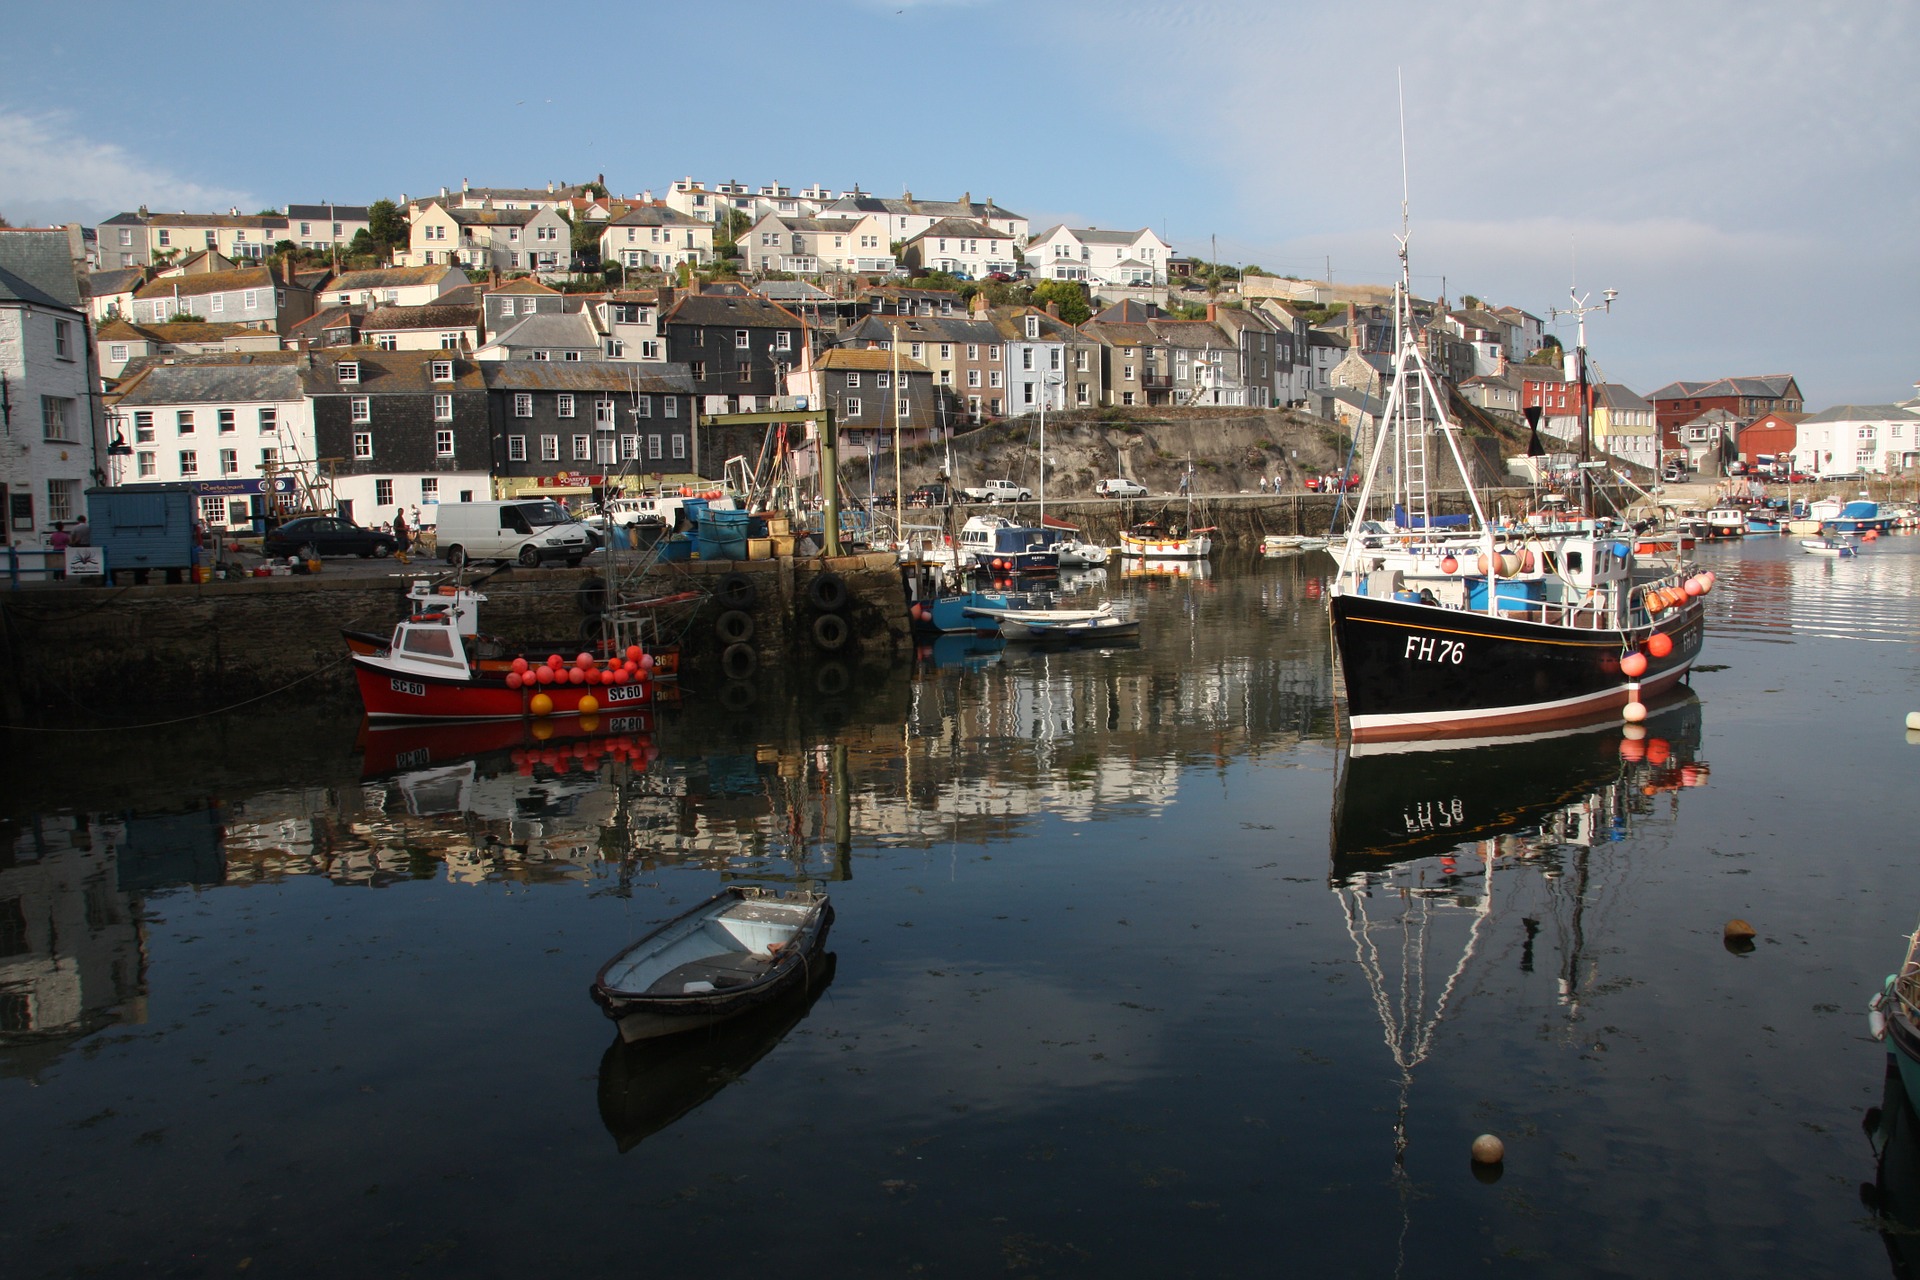 CORNWALL: A KEY ELECTION BATTLEGROUND IN THE SOUTH WEST